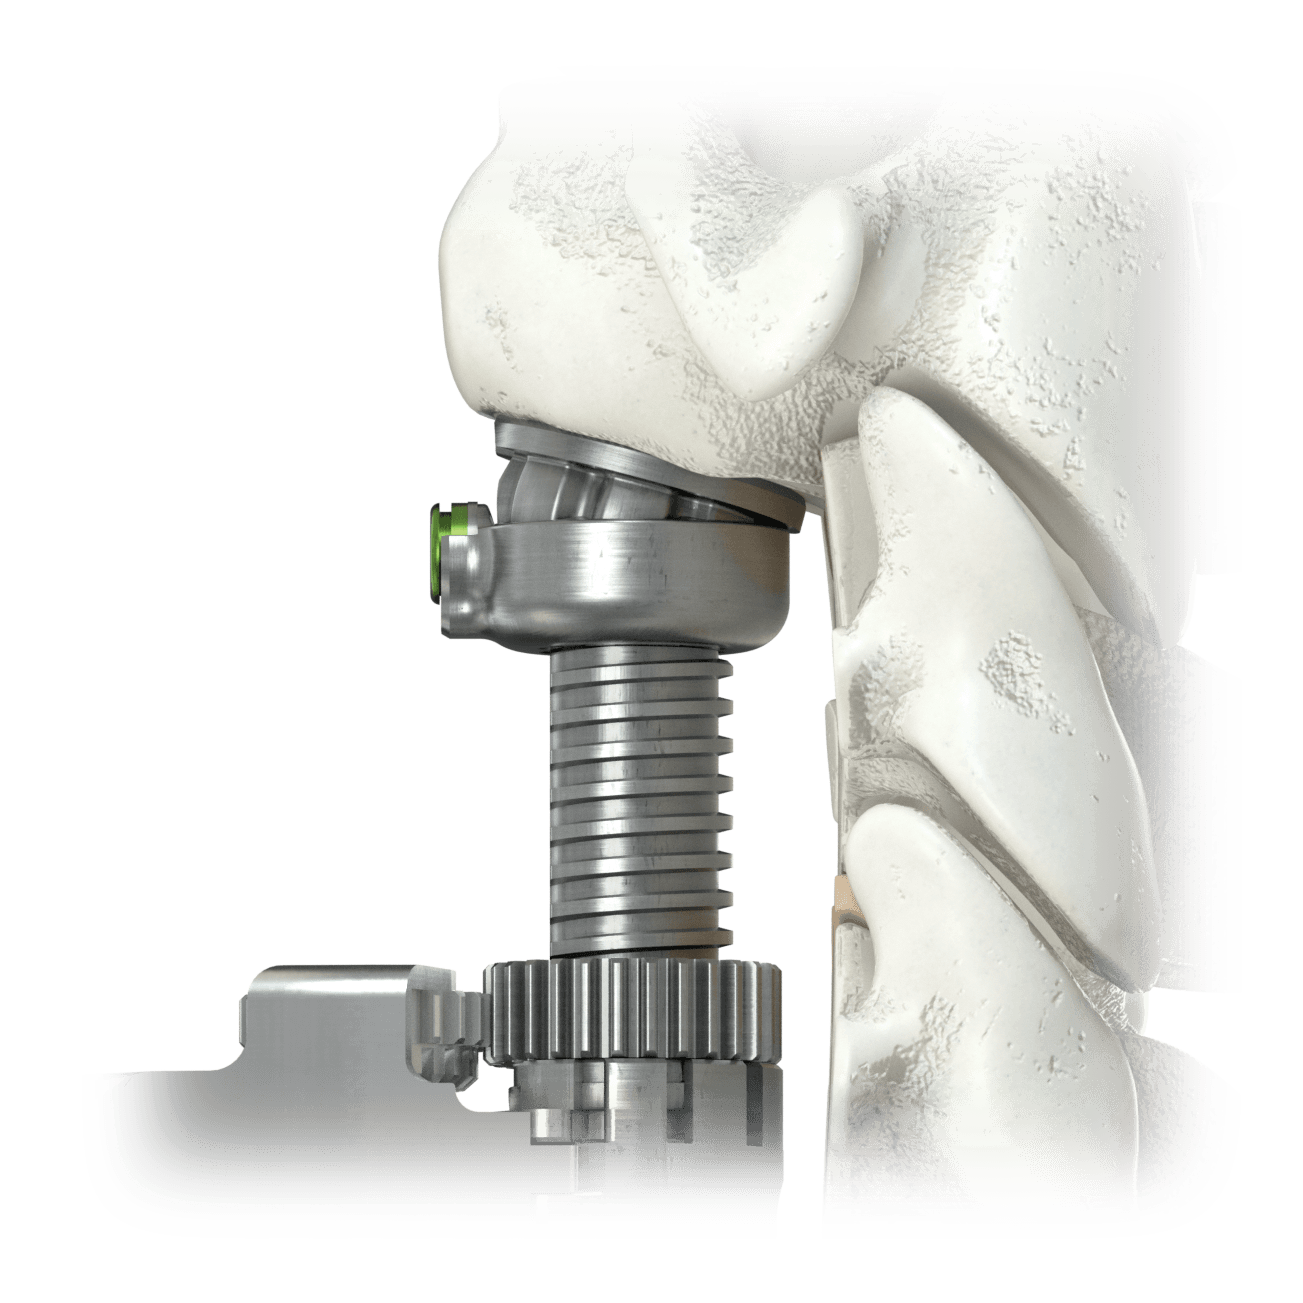 Precise Fit for FORTIFY VA™ Implant